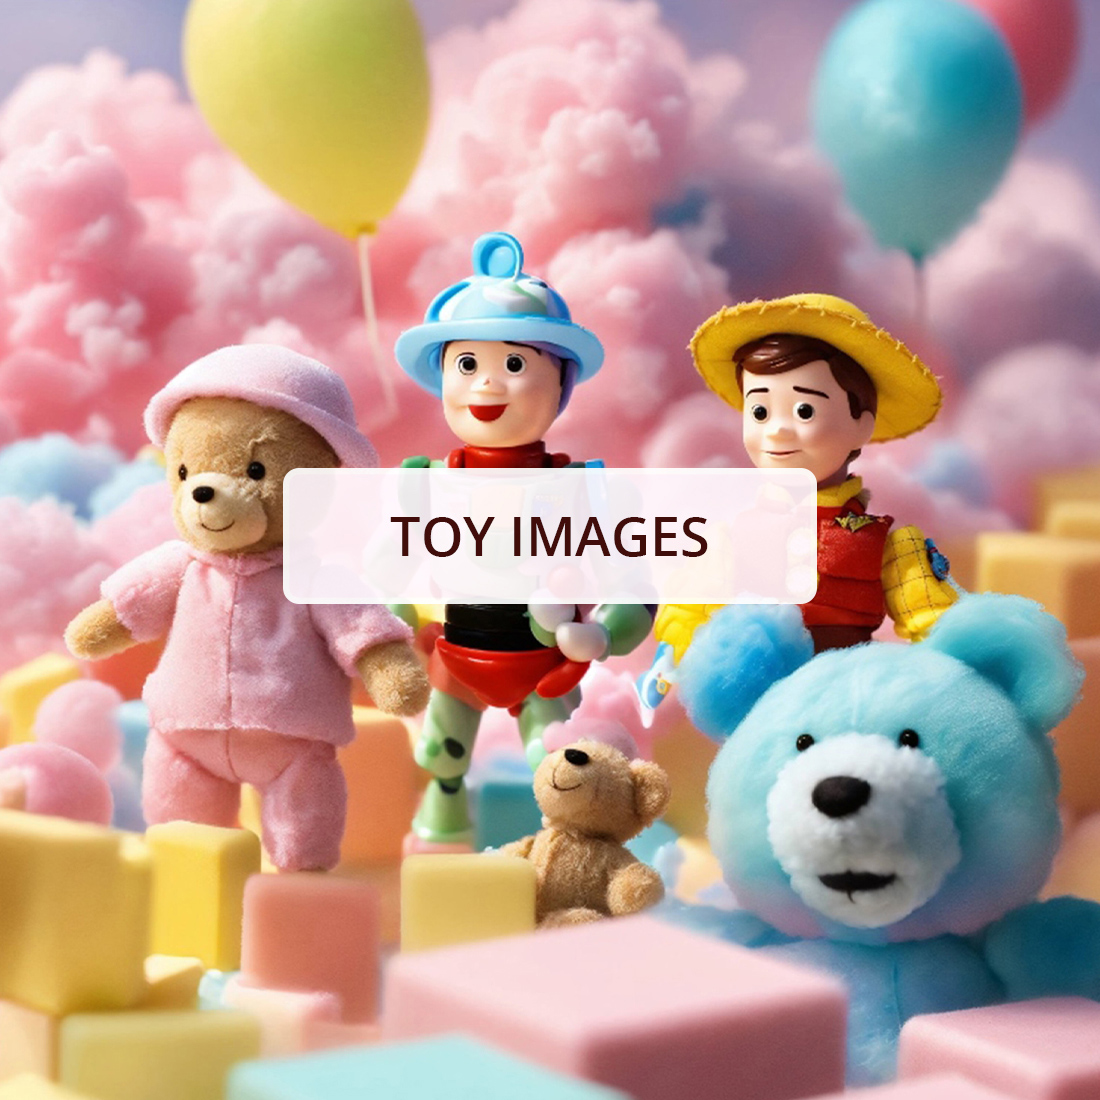 Toy Images, Photo, children's plastic toy, children's bear and plastic toy cover image.